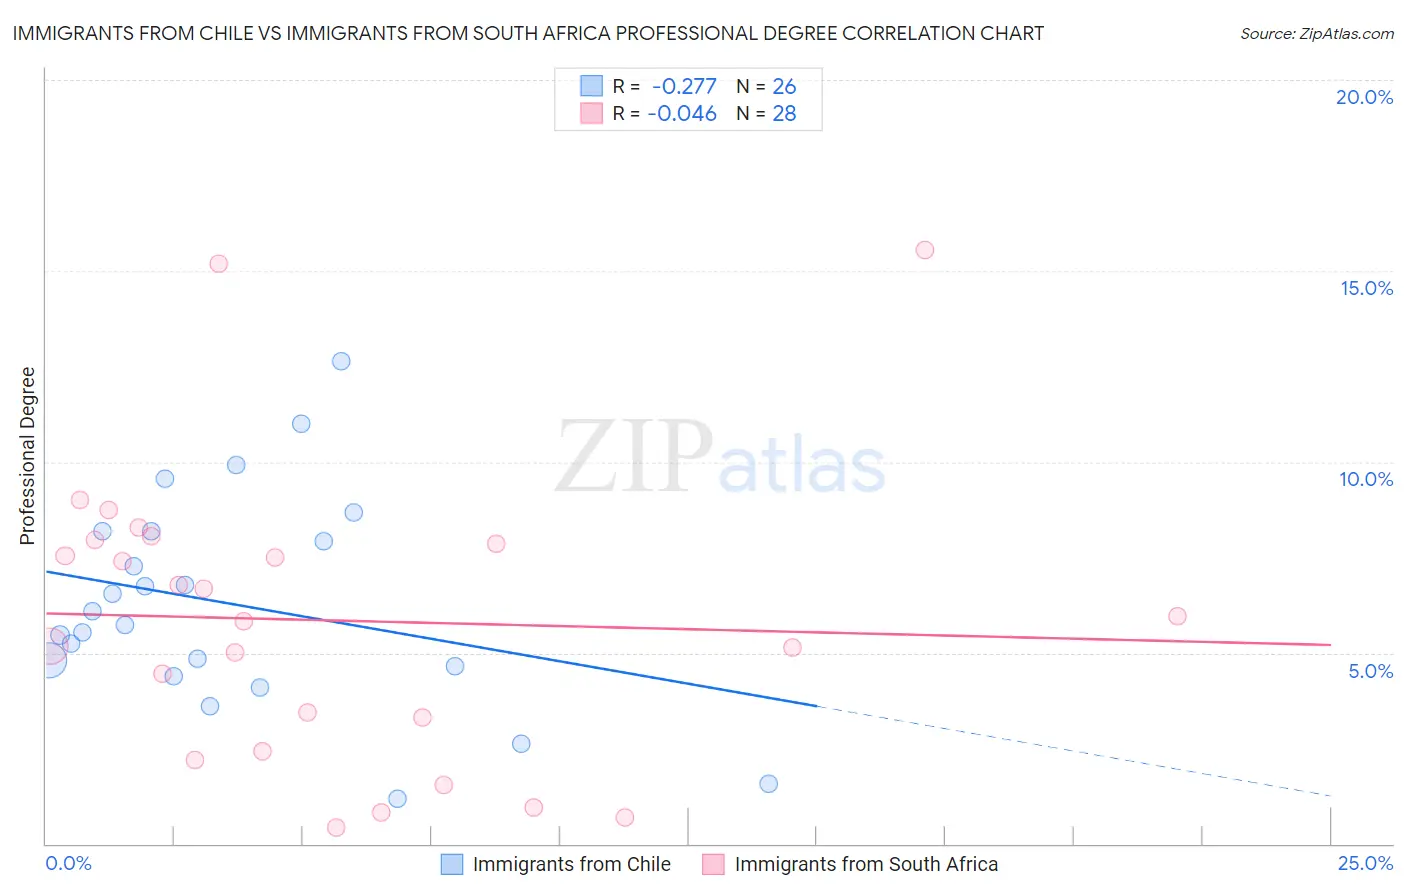 Immigrants from Chile vs Immigrants from South Africa Professional Degree